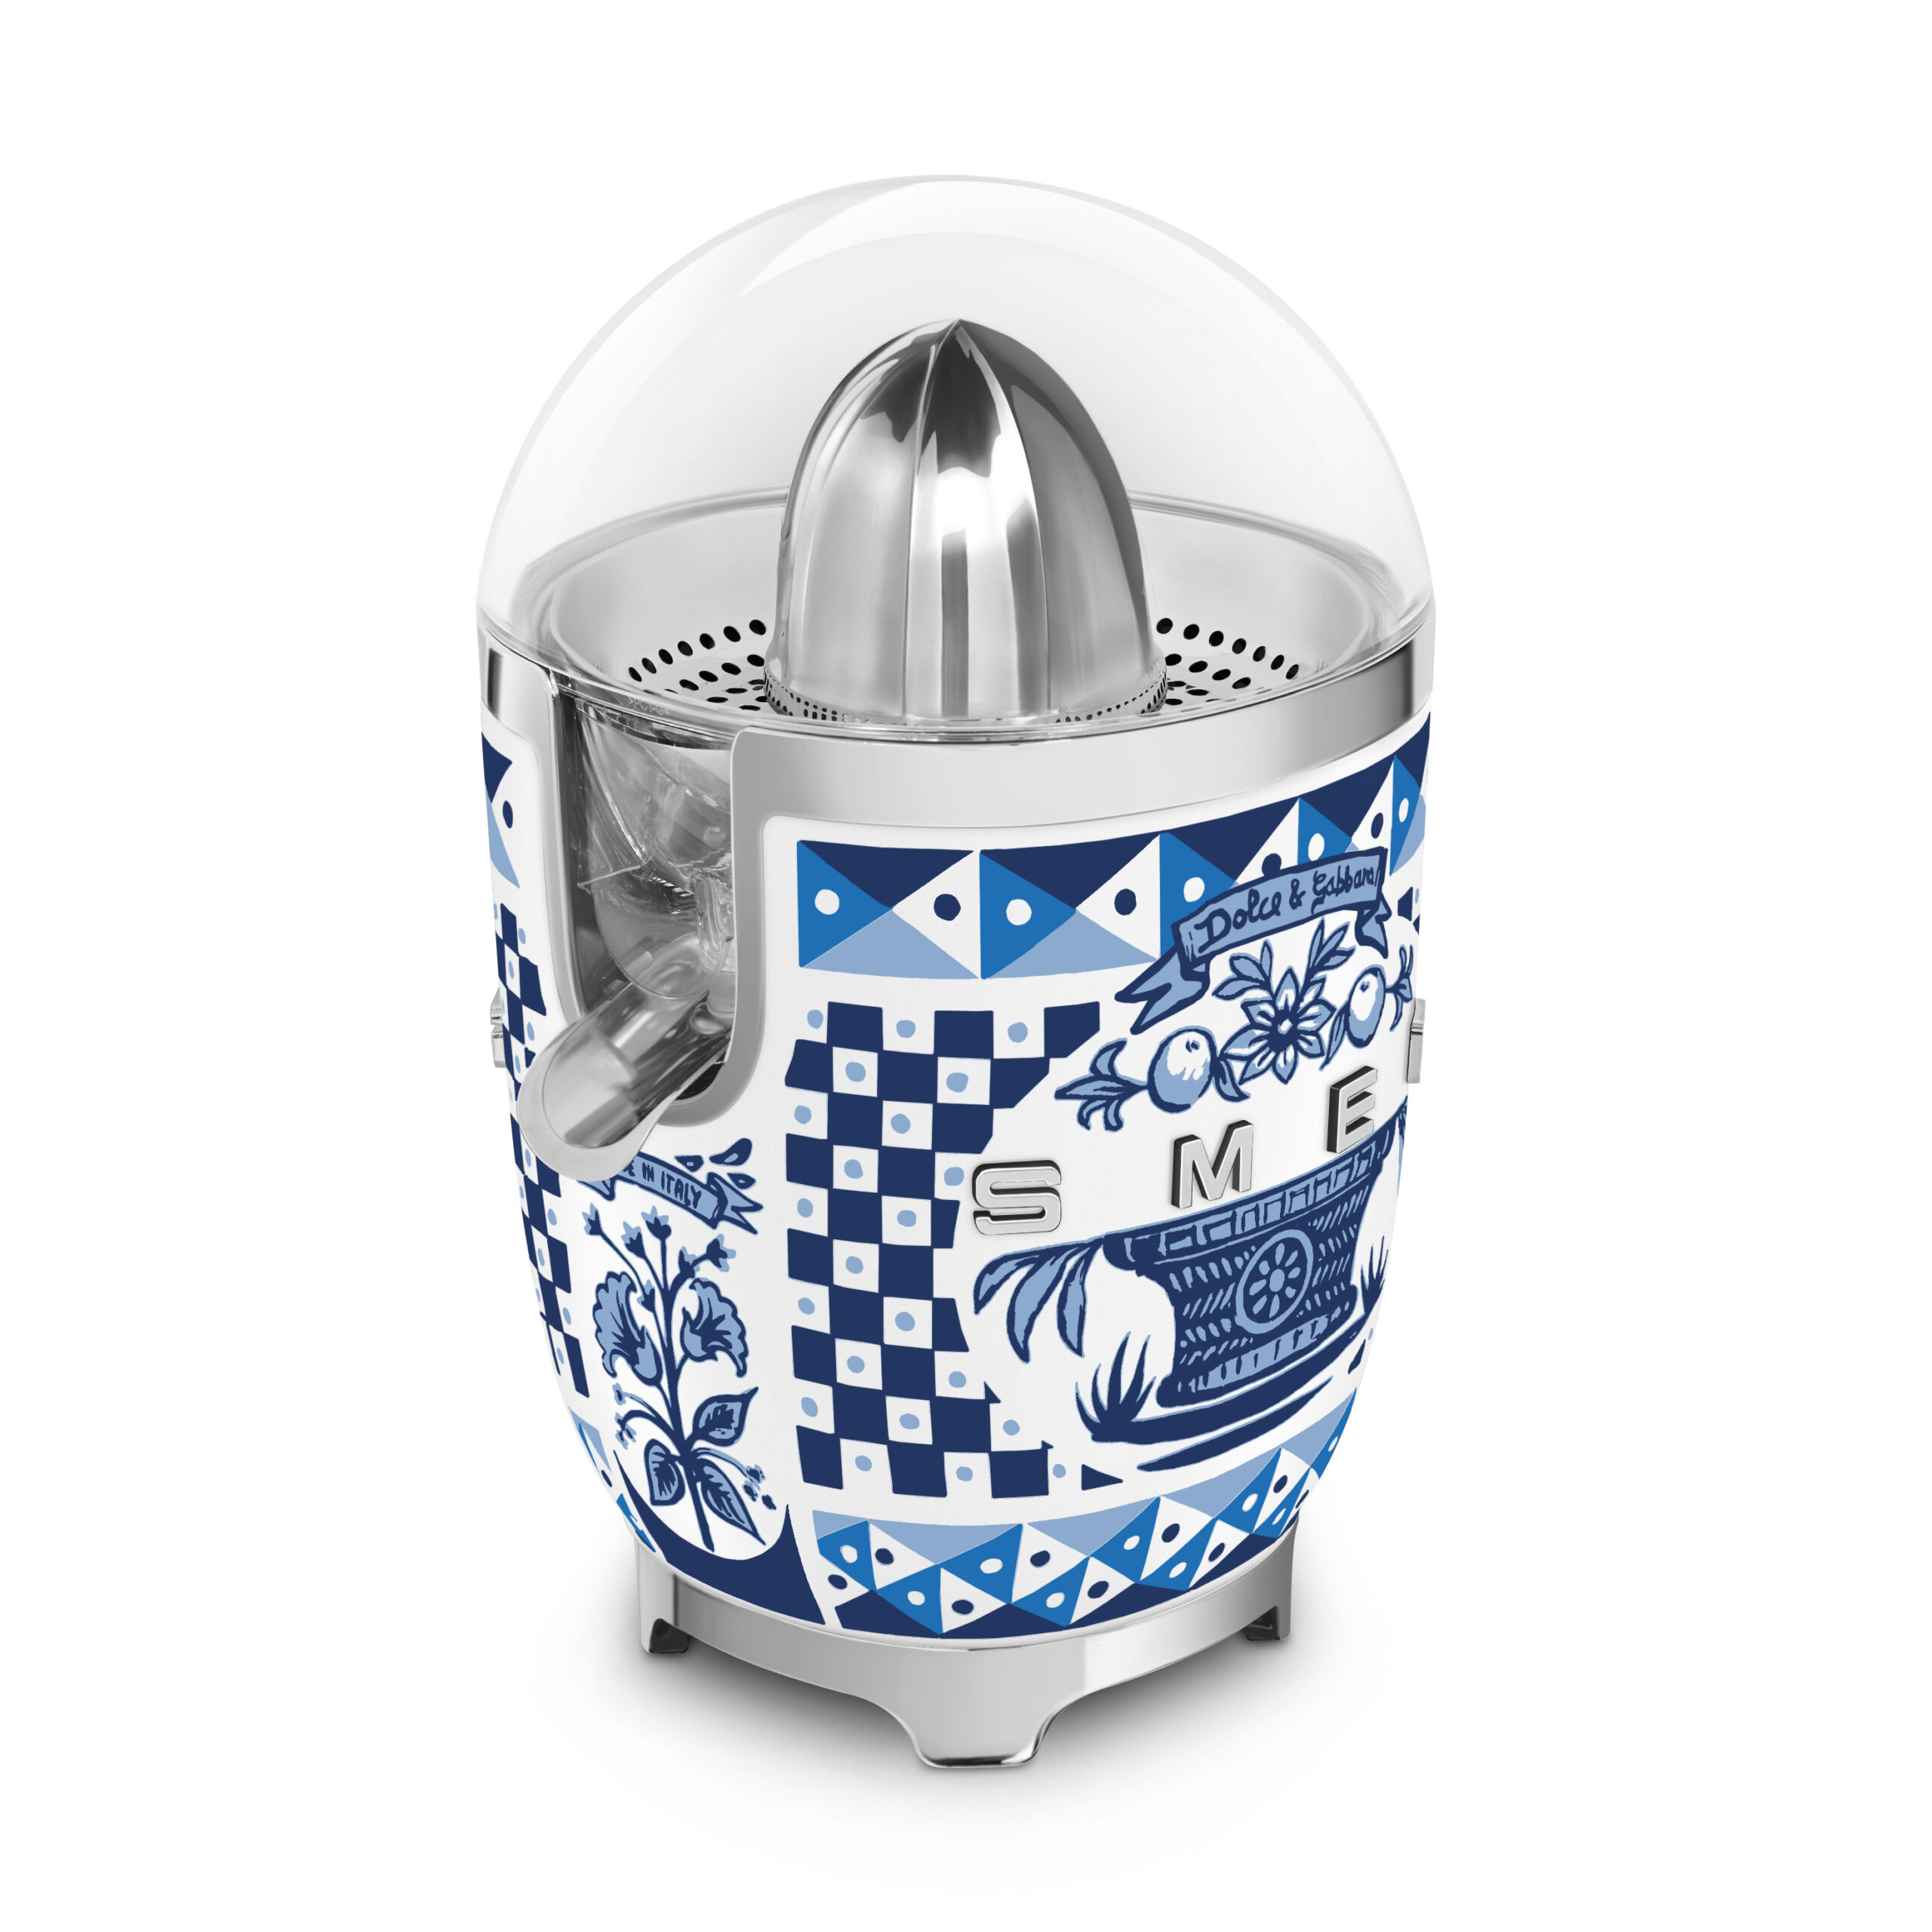 SMEG Dolce & Gabbana Citrus Juicer, Blu Mediterraneo boasts a powerful motor, built-in sensor, dripless spout for fast and easy fresh-squeezed juices!